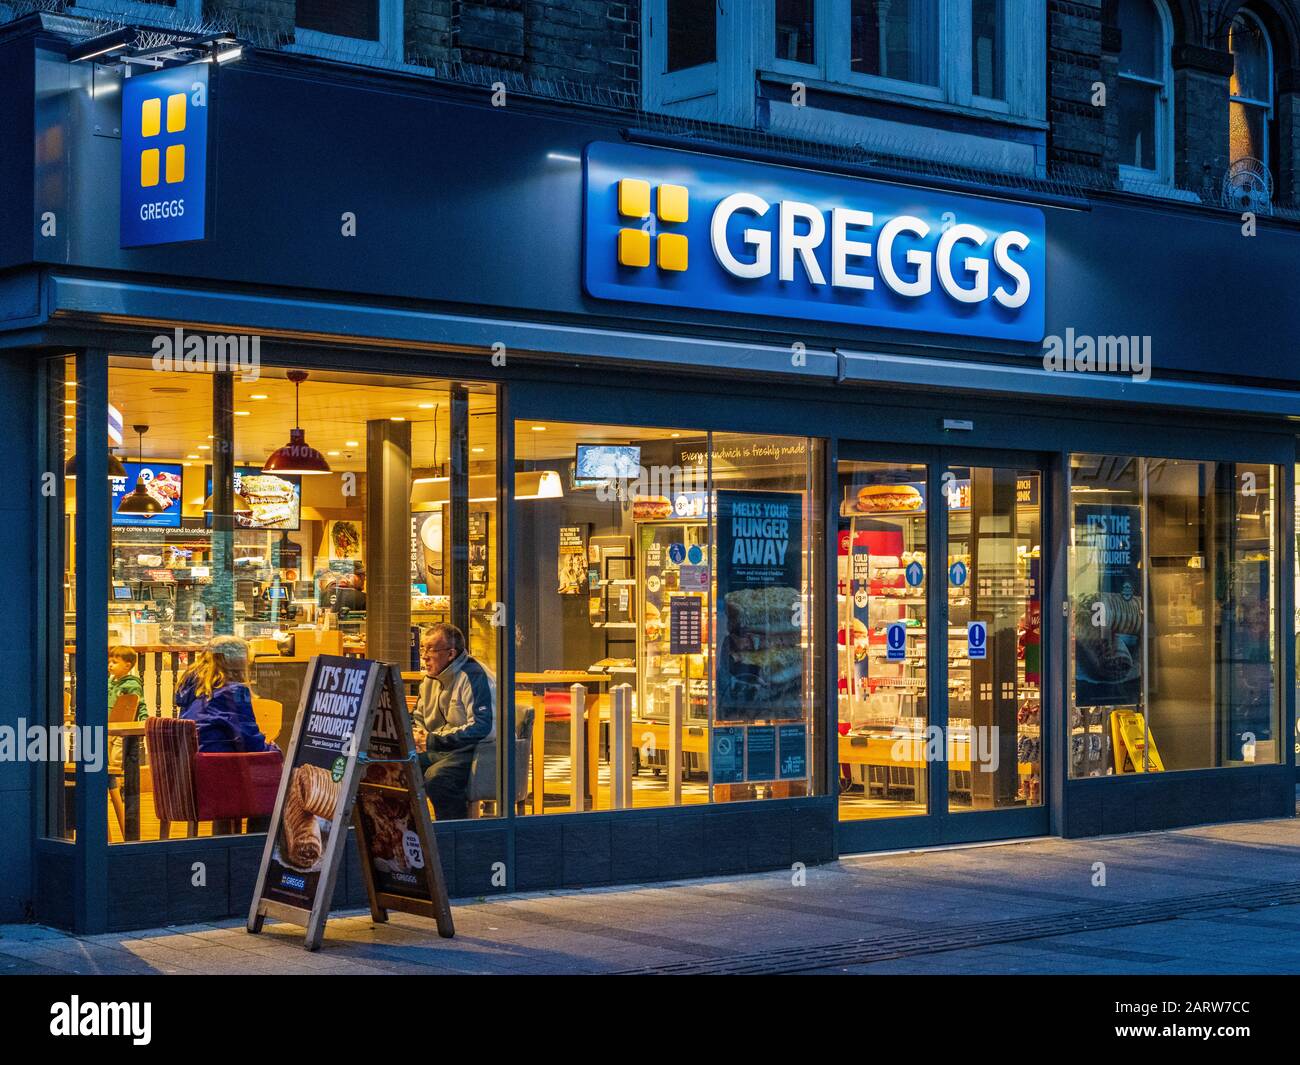 Greggs Bakery - Greggs Cafe and Food Store au crépuscule Banque D'Images